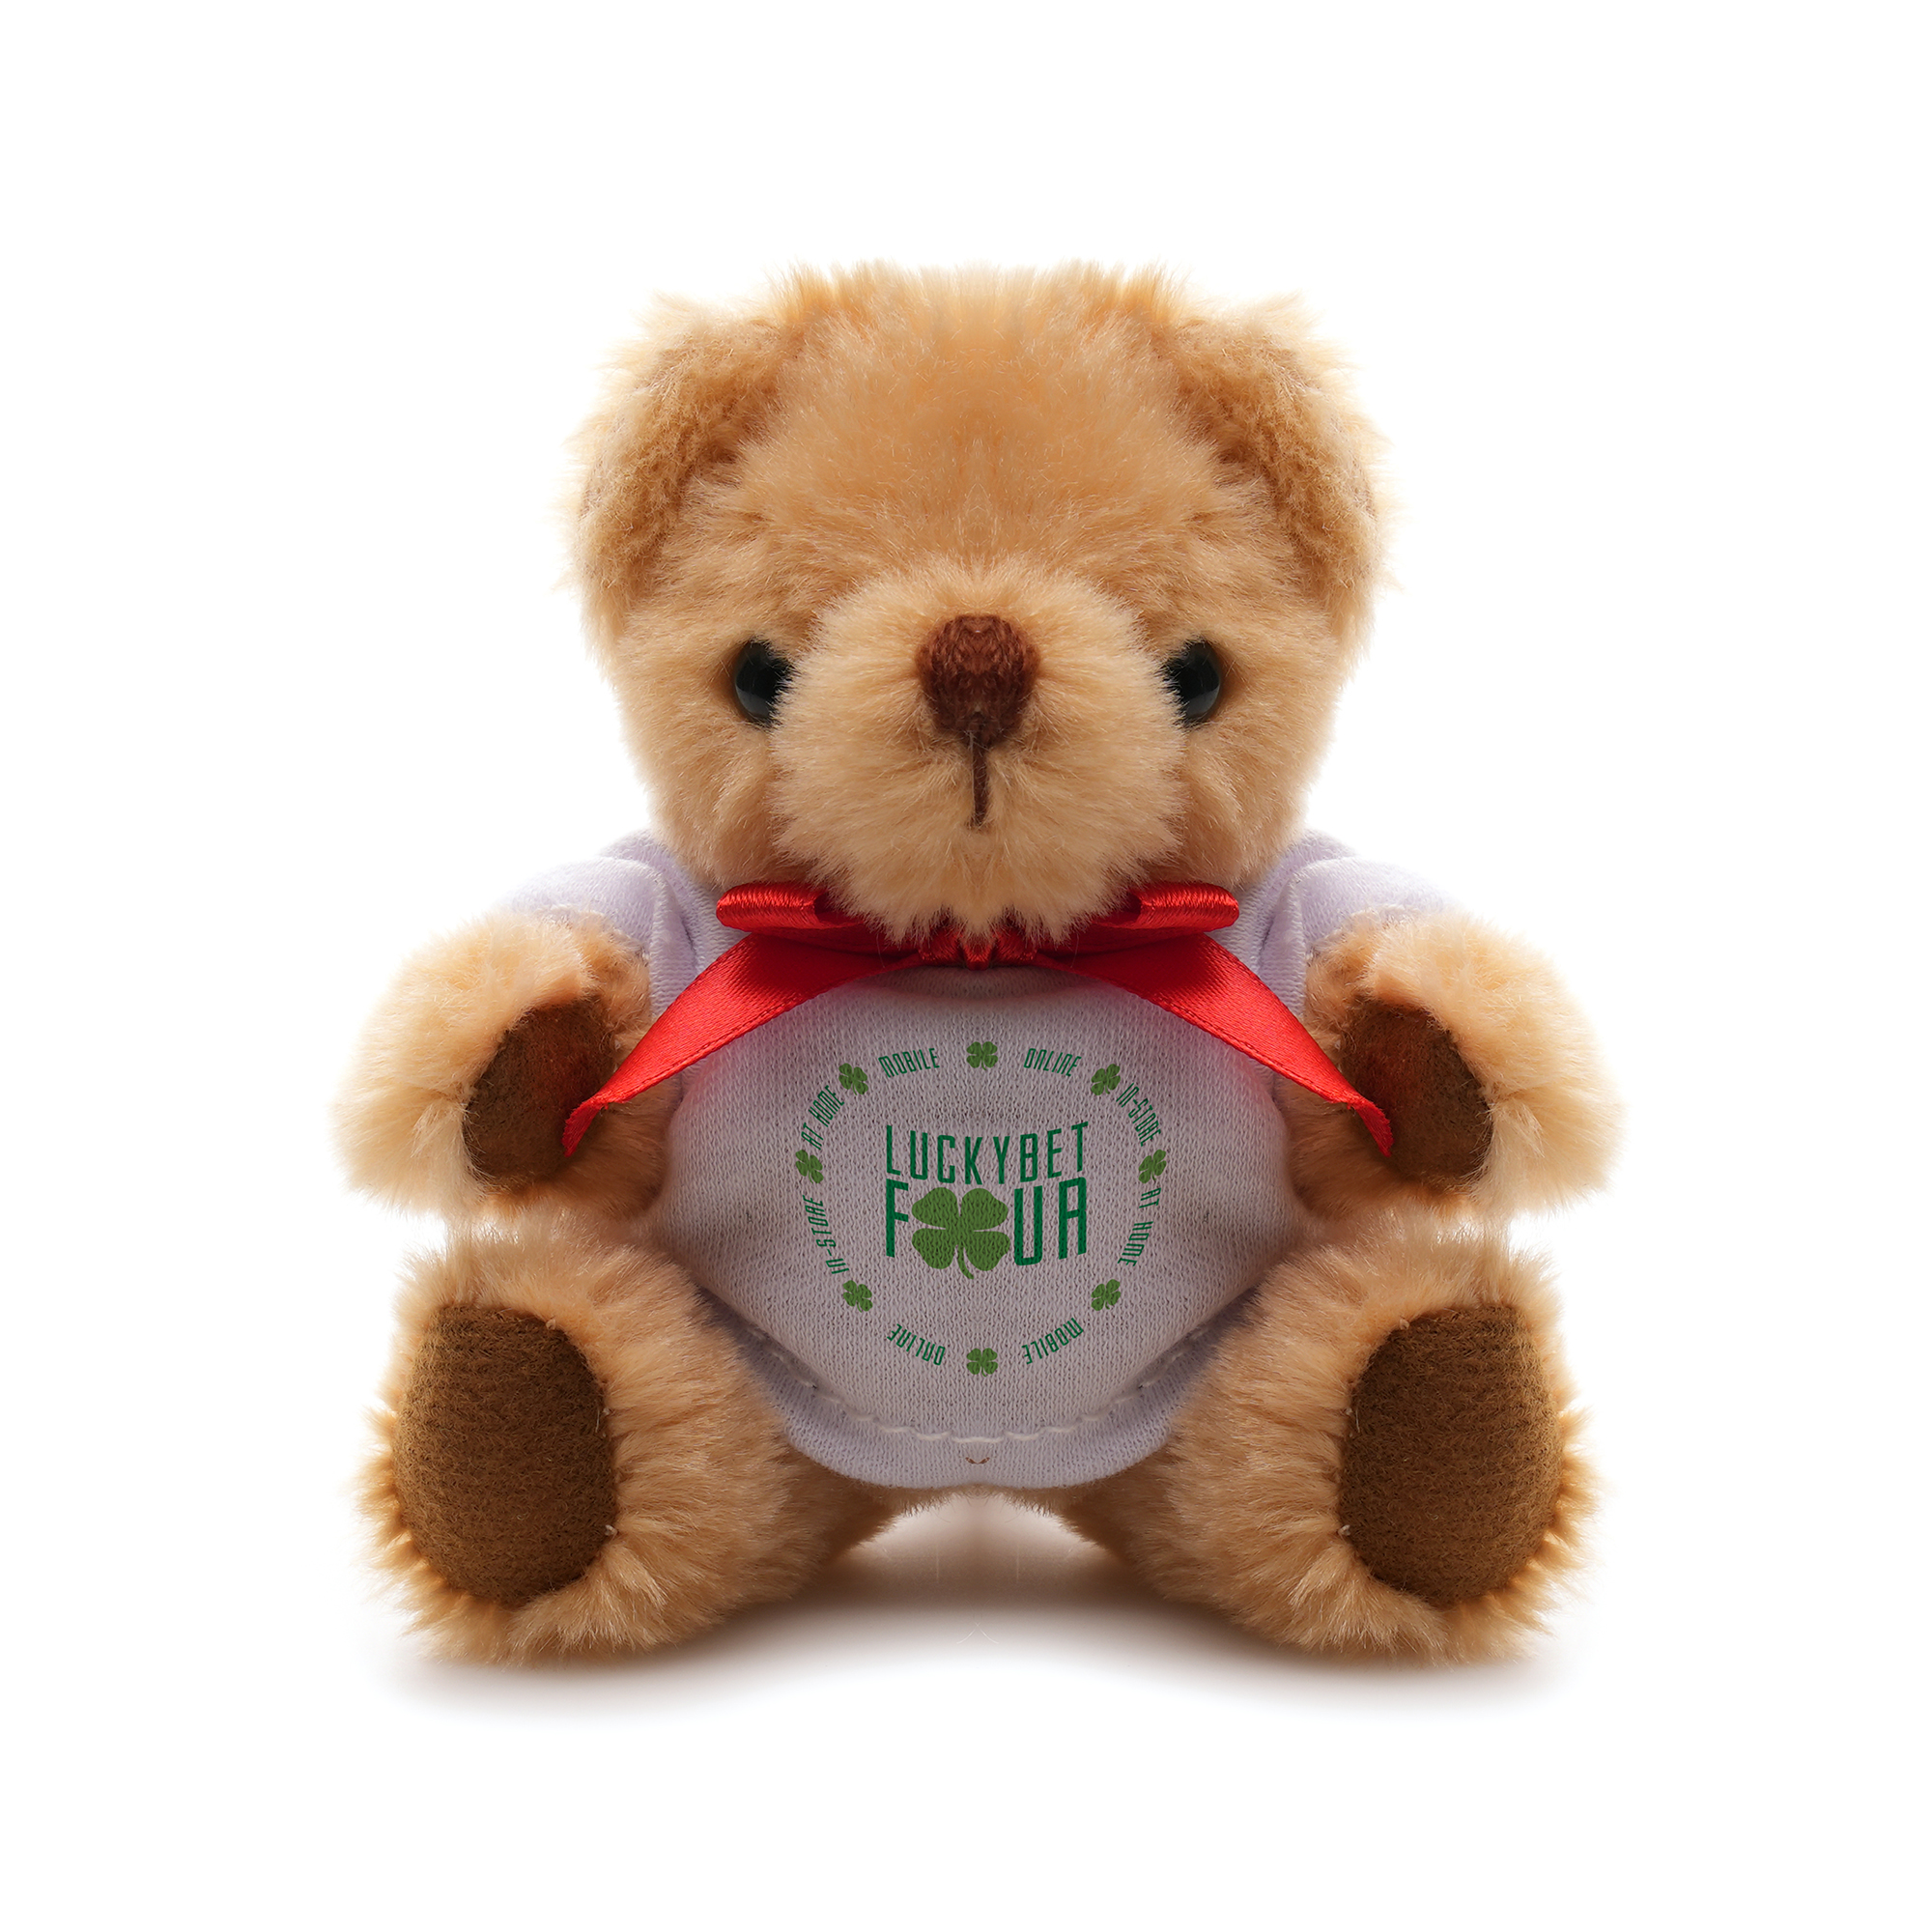 Crafted with polyester fabric and red ribbon neck tie, this 13cm teddy bear comes with imoving arms and lets, cotton filler, embroidered thread nose and mouth, plastic eyes adding a real element and white t-shirt for branding.